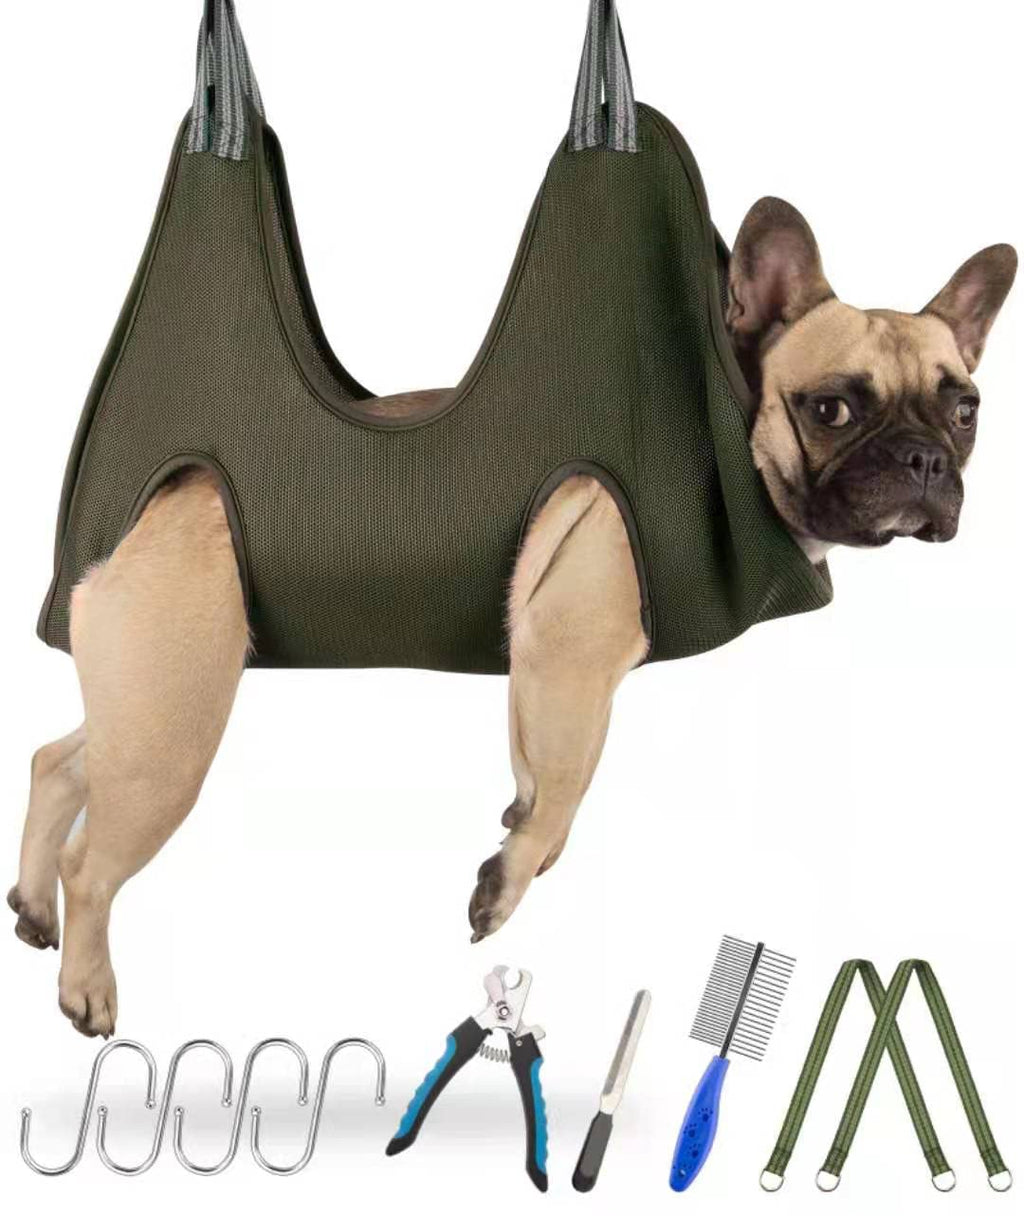 Kkiimatt 10 in 1 Pet Grooming Hammock Harness with Nail Clippers/Trimmer, Nail File, Comb,Breathable Dog Hammock Restraint Bag, Dog Grooming Helper for Nail Trimming/Clipping xs Khaki Green - PawsPlanet Australia